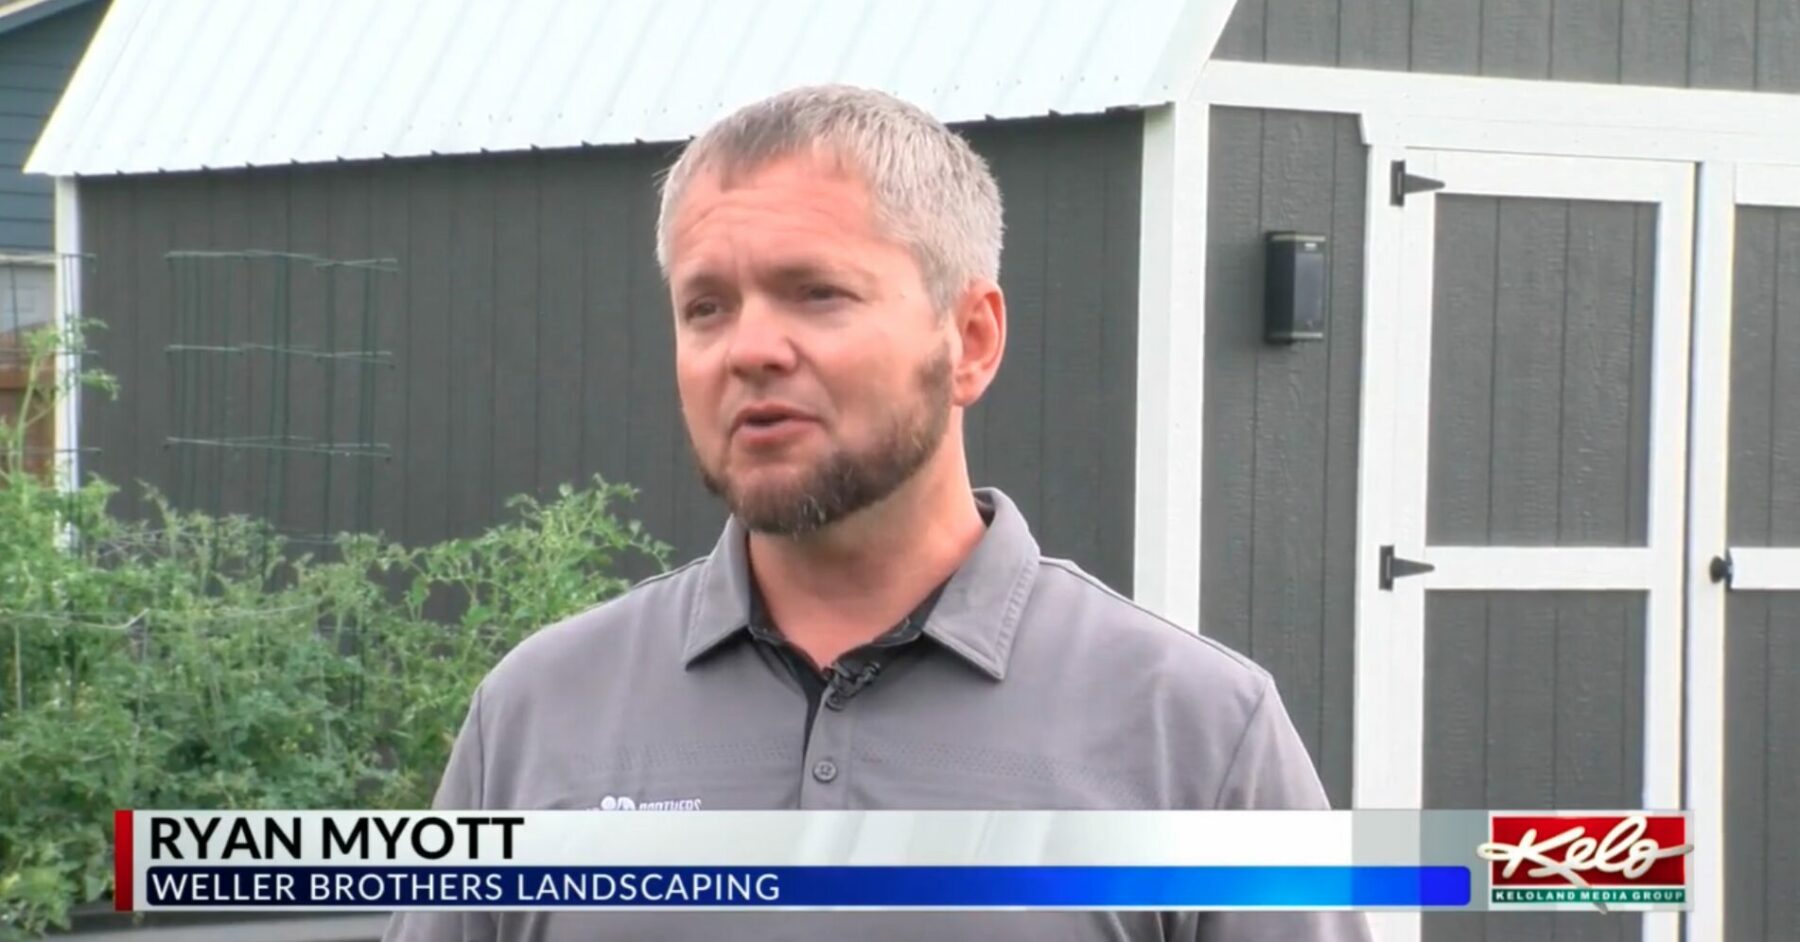 Ryan Myott of Weller Brothers Landscaping in Sioux Falls, SD discussing red thread disease on Keloland news